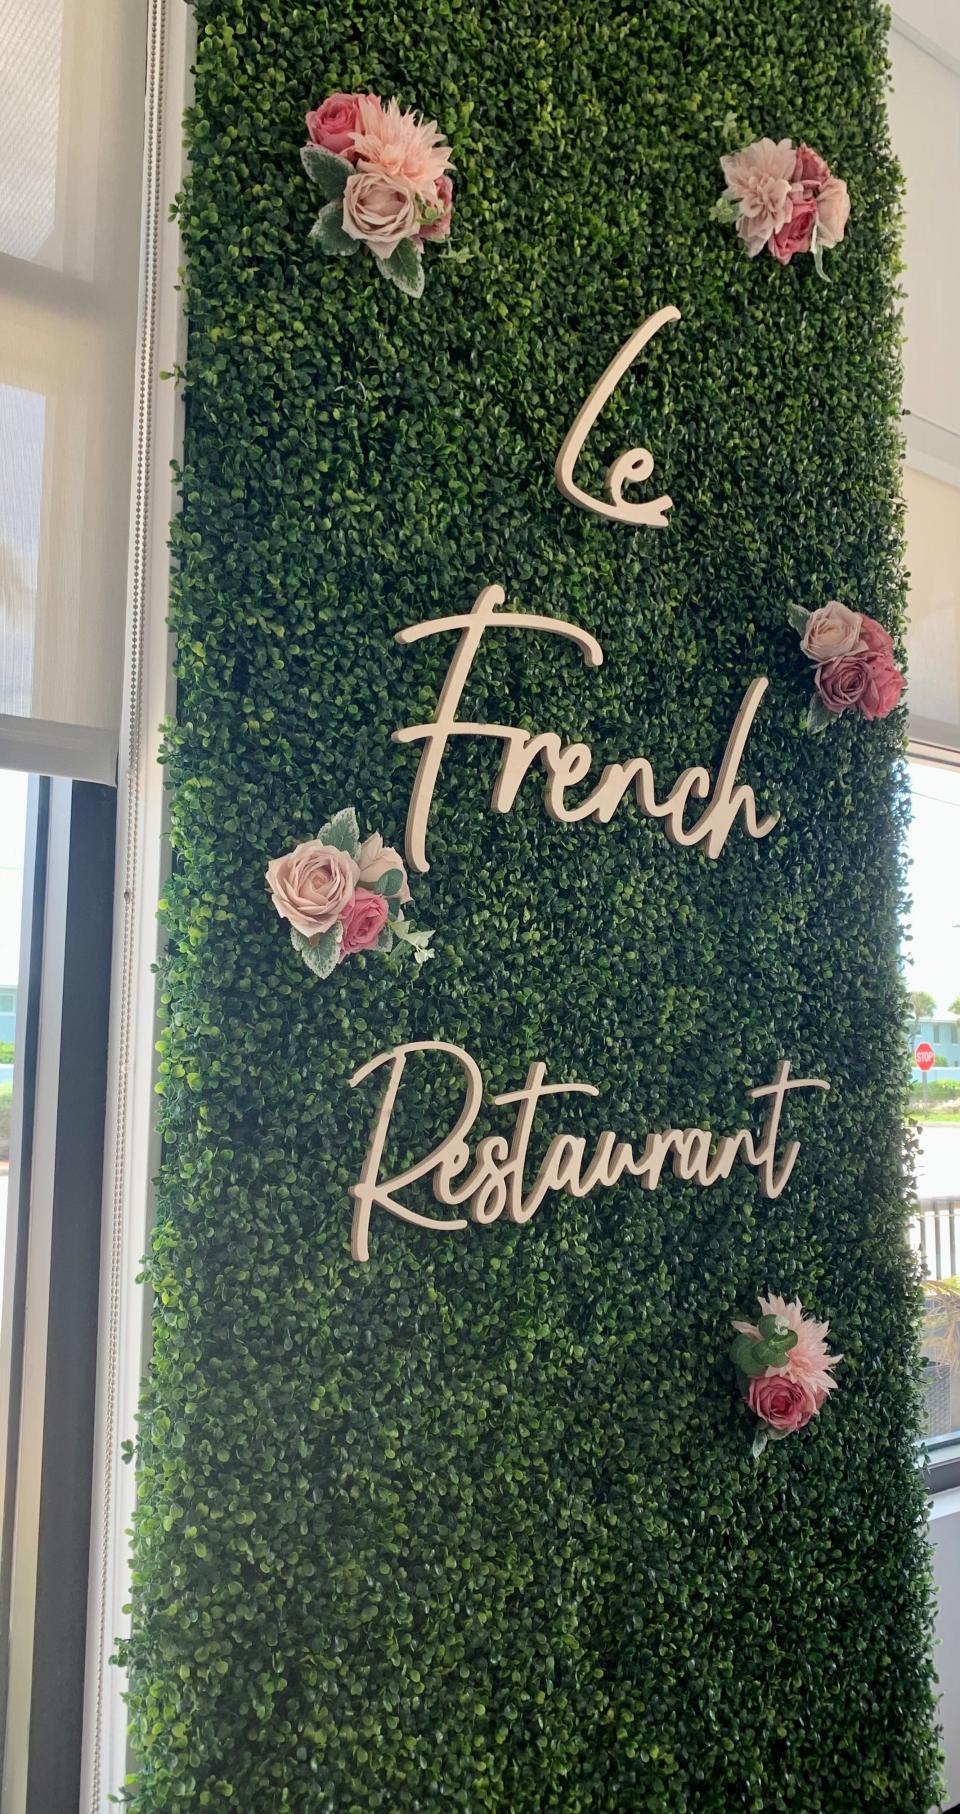 Le French Restaurant in Indian Harbour Beach is sunny, cheerful and eat-off-the-floor immaculate, and service is immediate and professional.